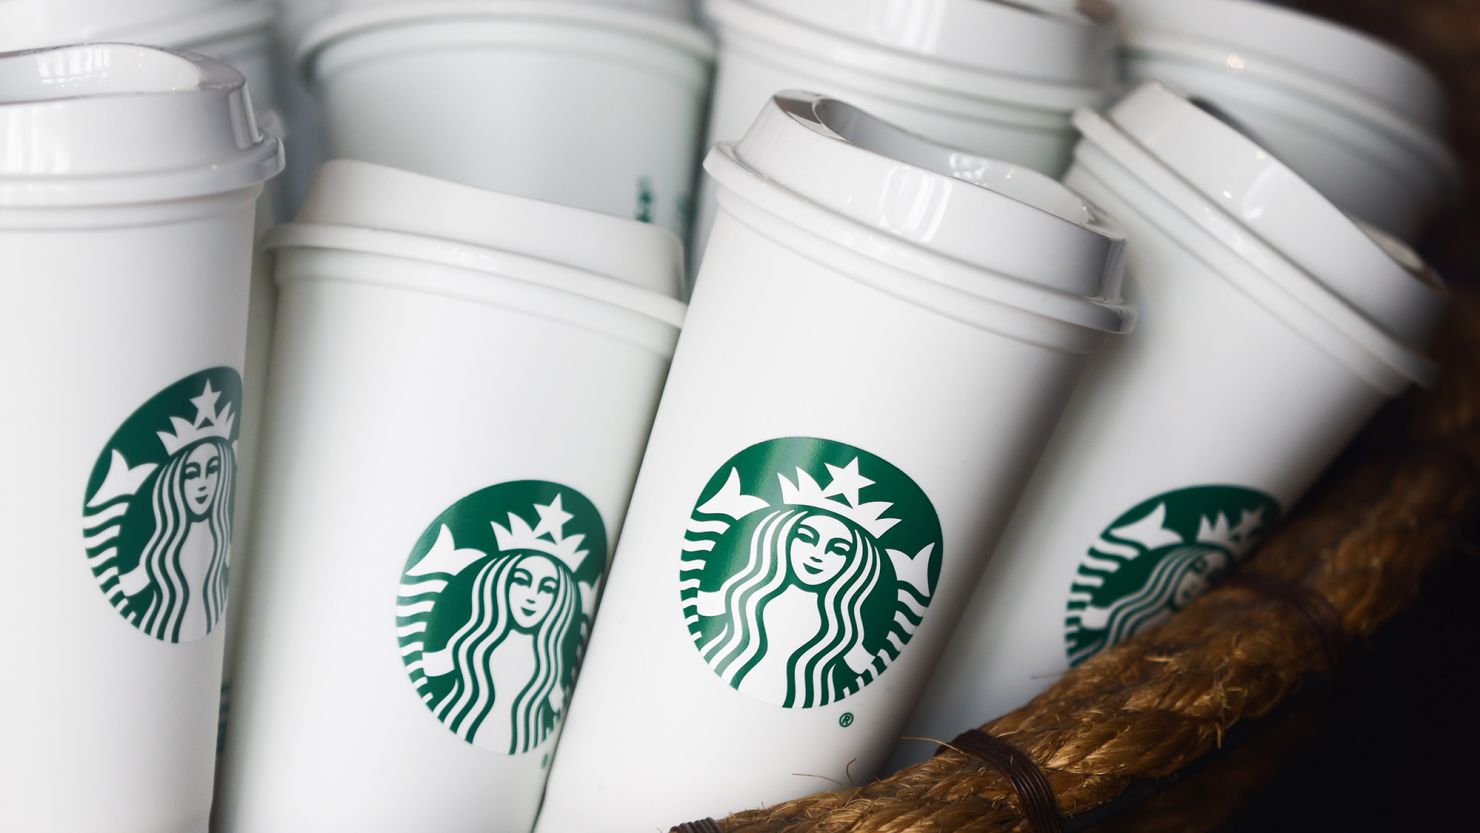 Starbucks customers can now use their own cups for drive-thru and app orders.